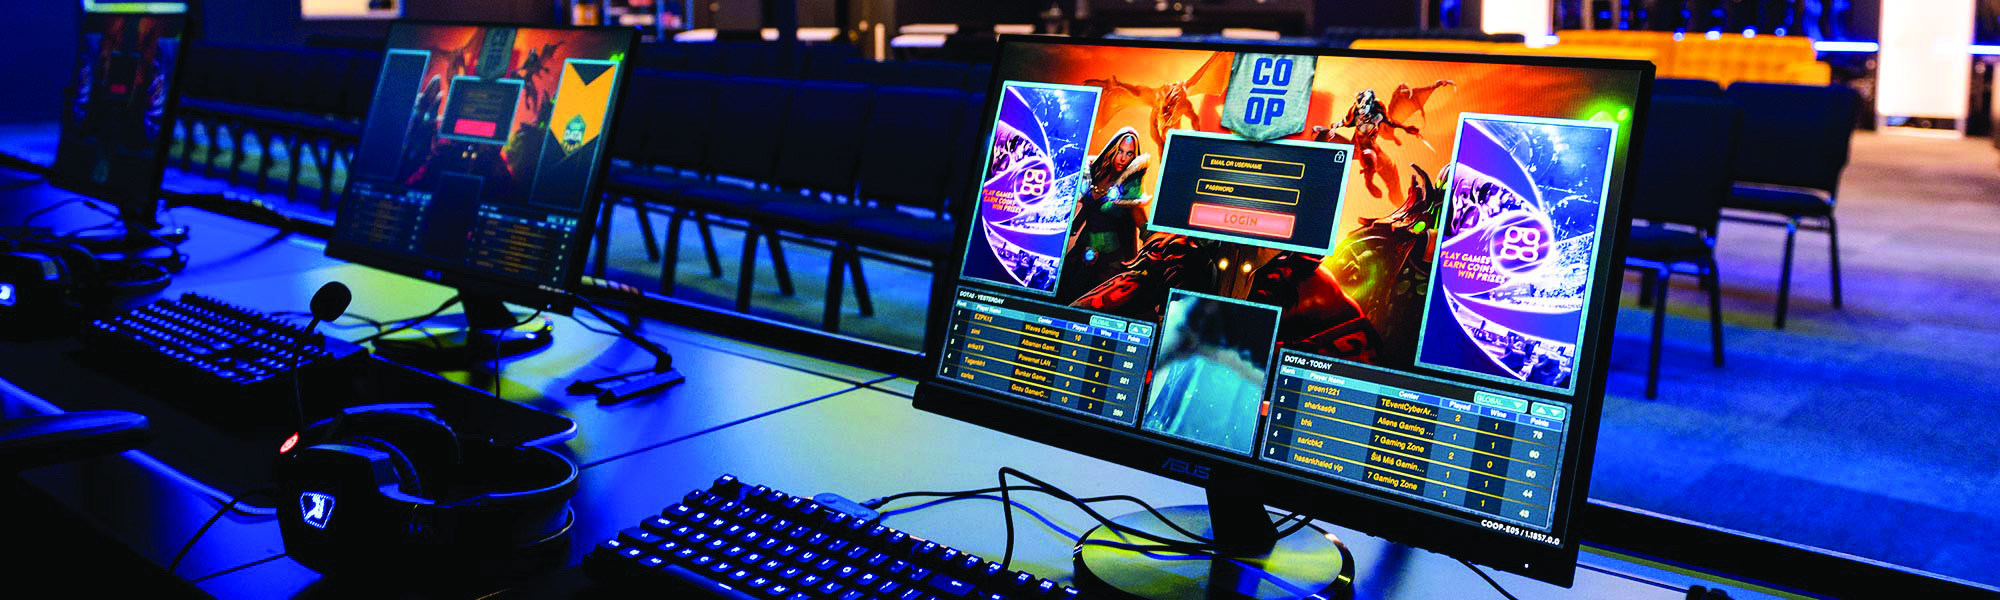 Gamers gear up for fall esports excitement